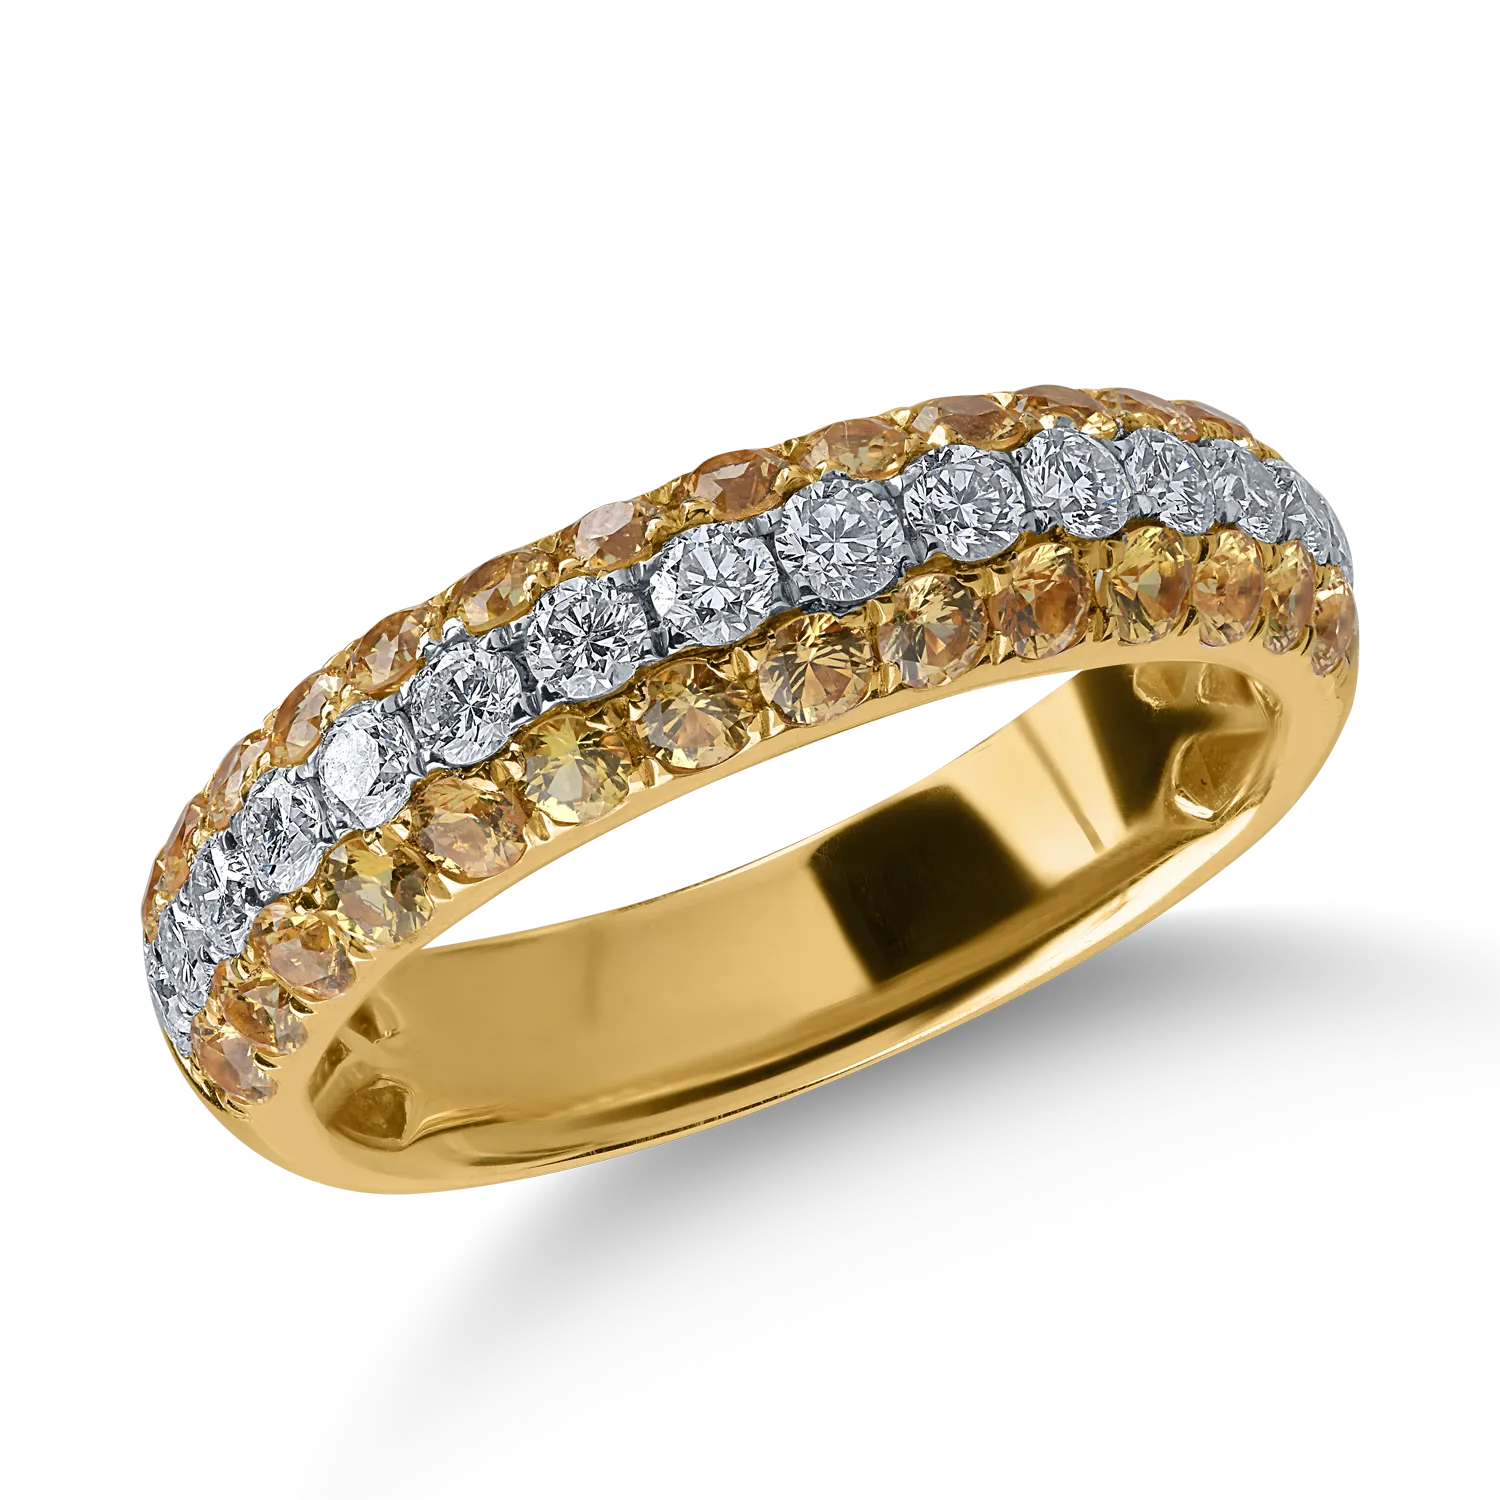 Half eternity ring in yellow gold with 0.88ct yellow sapphires and 0.49ct diamonds